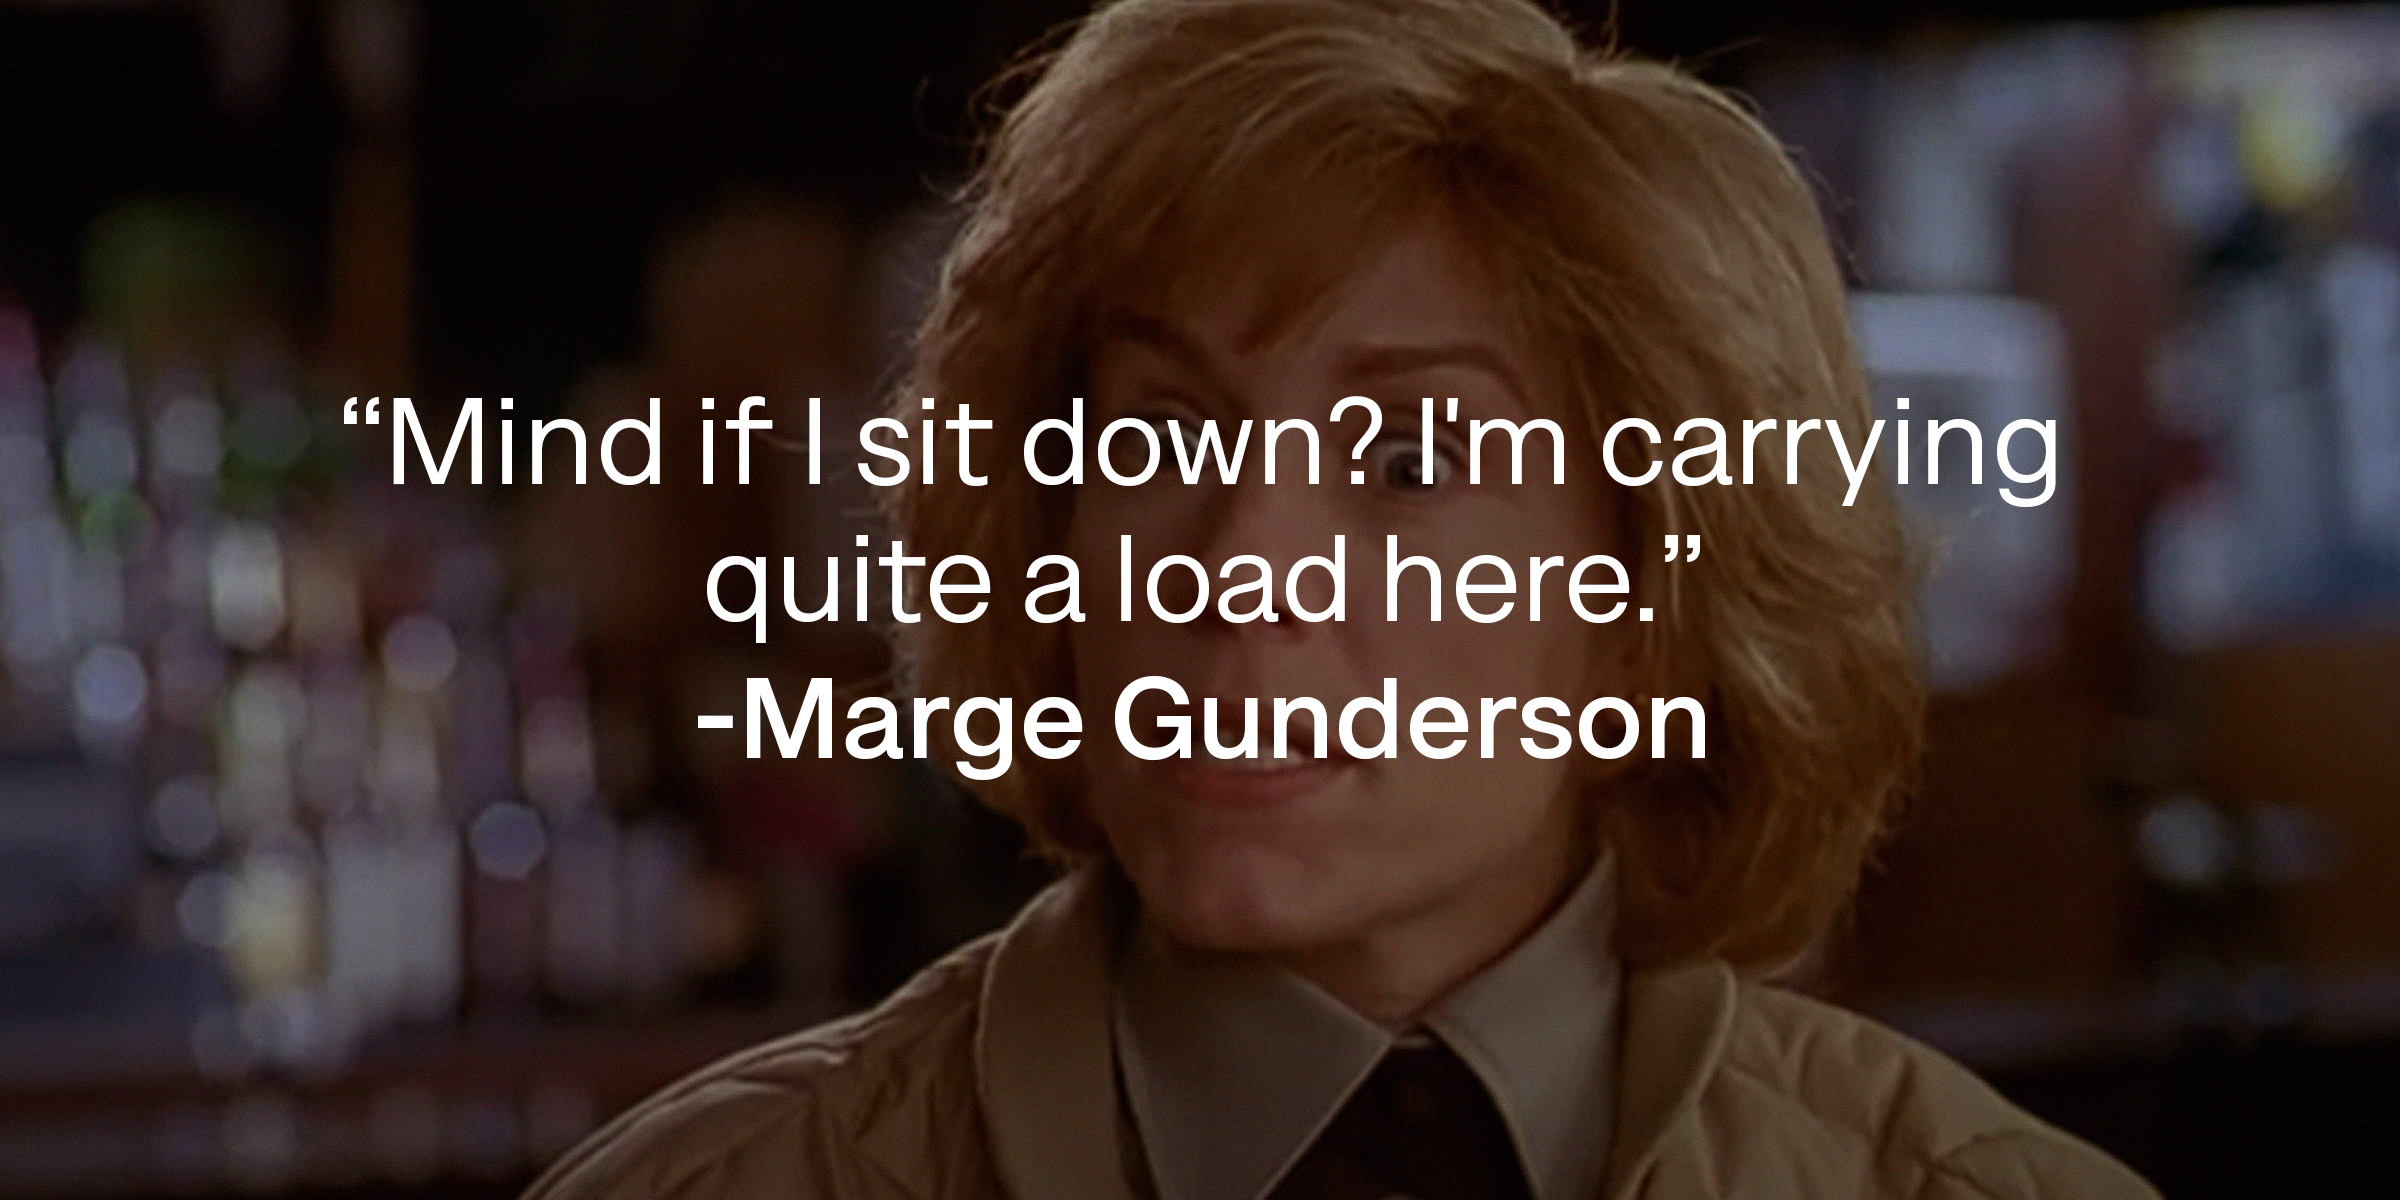 A photo of Marge Gunderson with Marge Gunderson's quote: "Mind if I sit down? I'm carrying quite a load here." | Source: youtube.com/MGMStudios